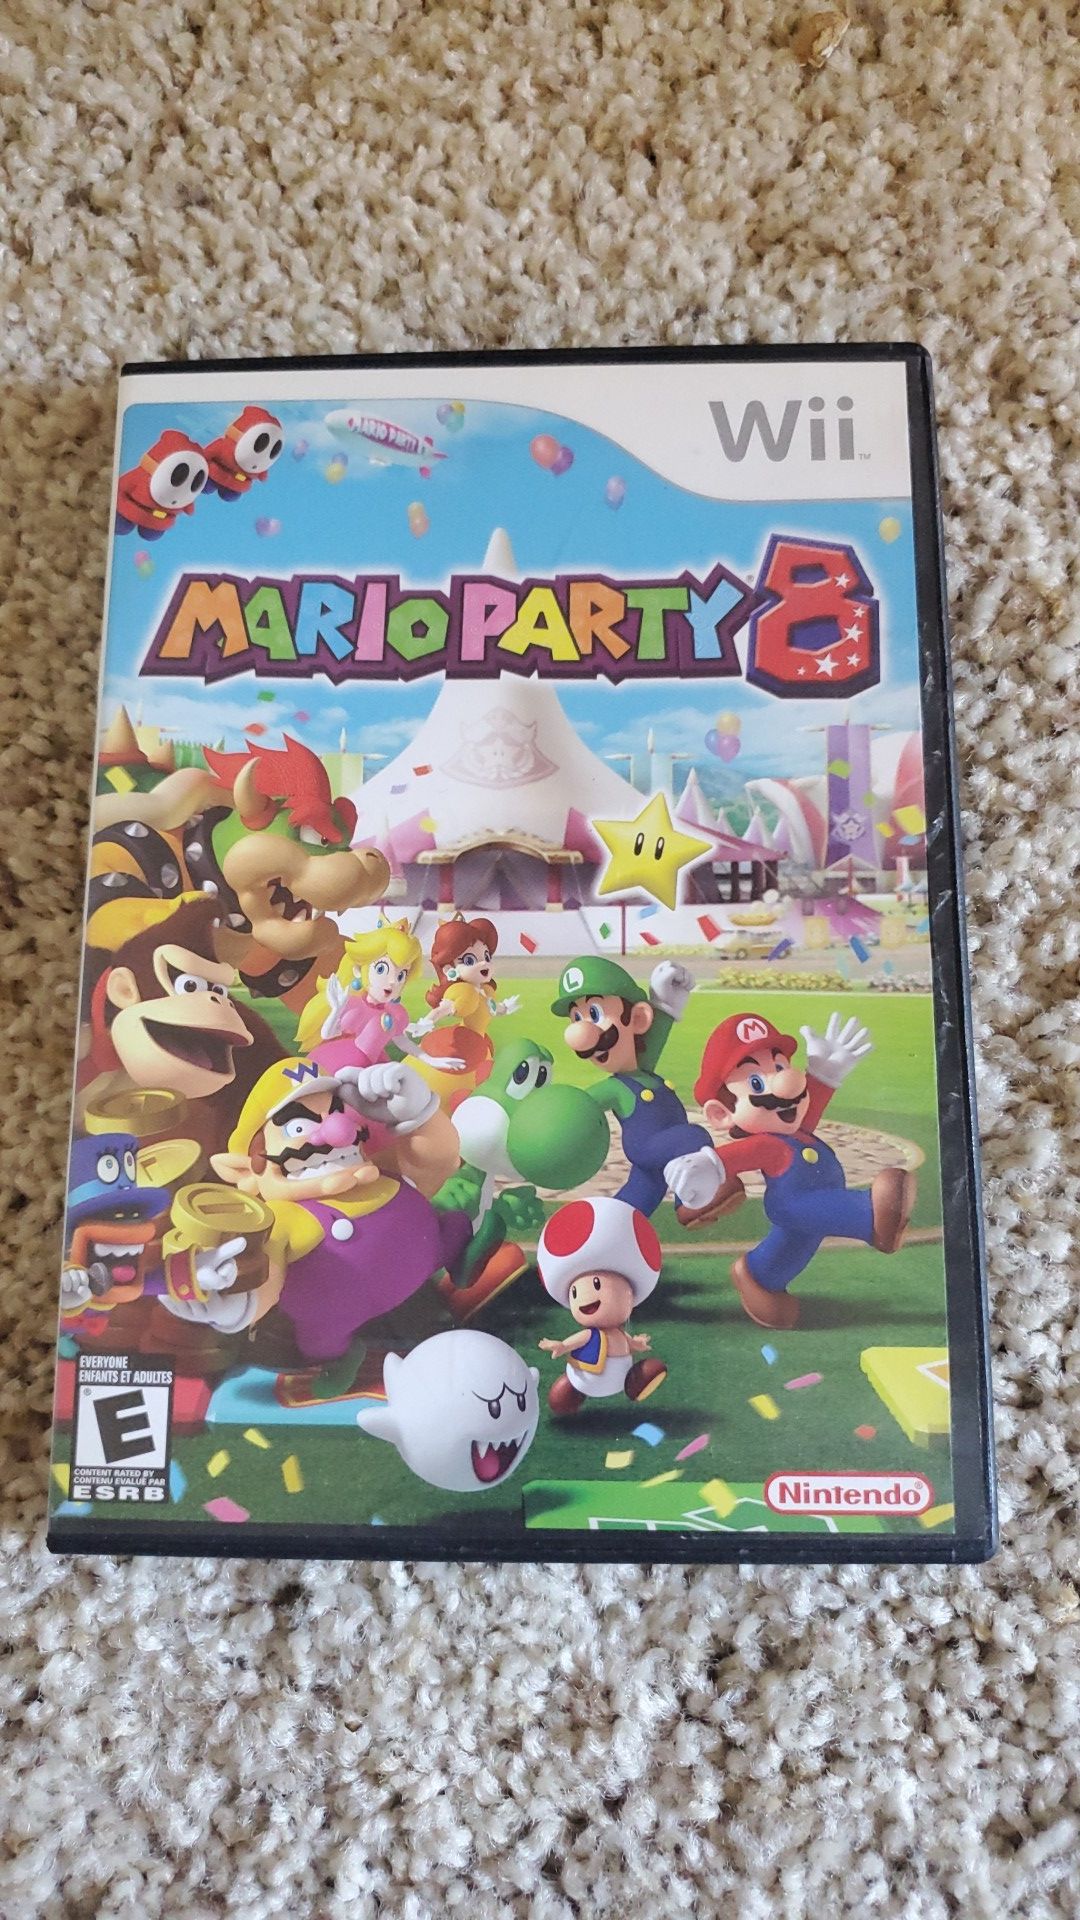 Mario party 8 for Wii